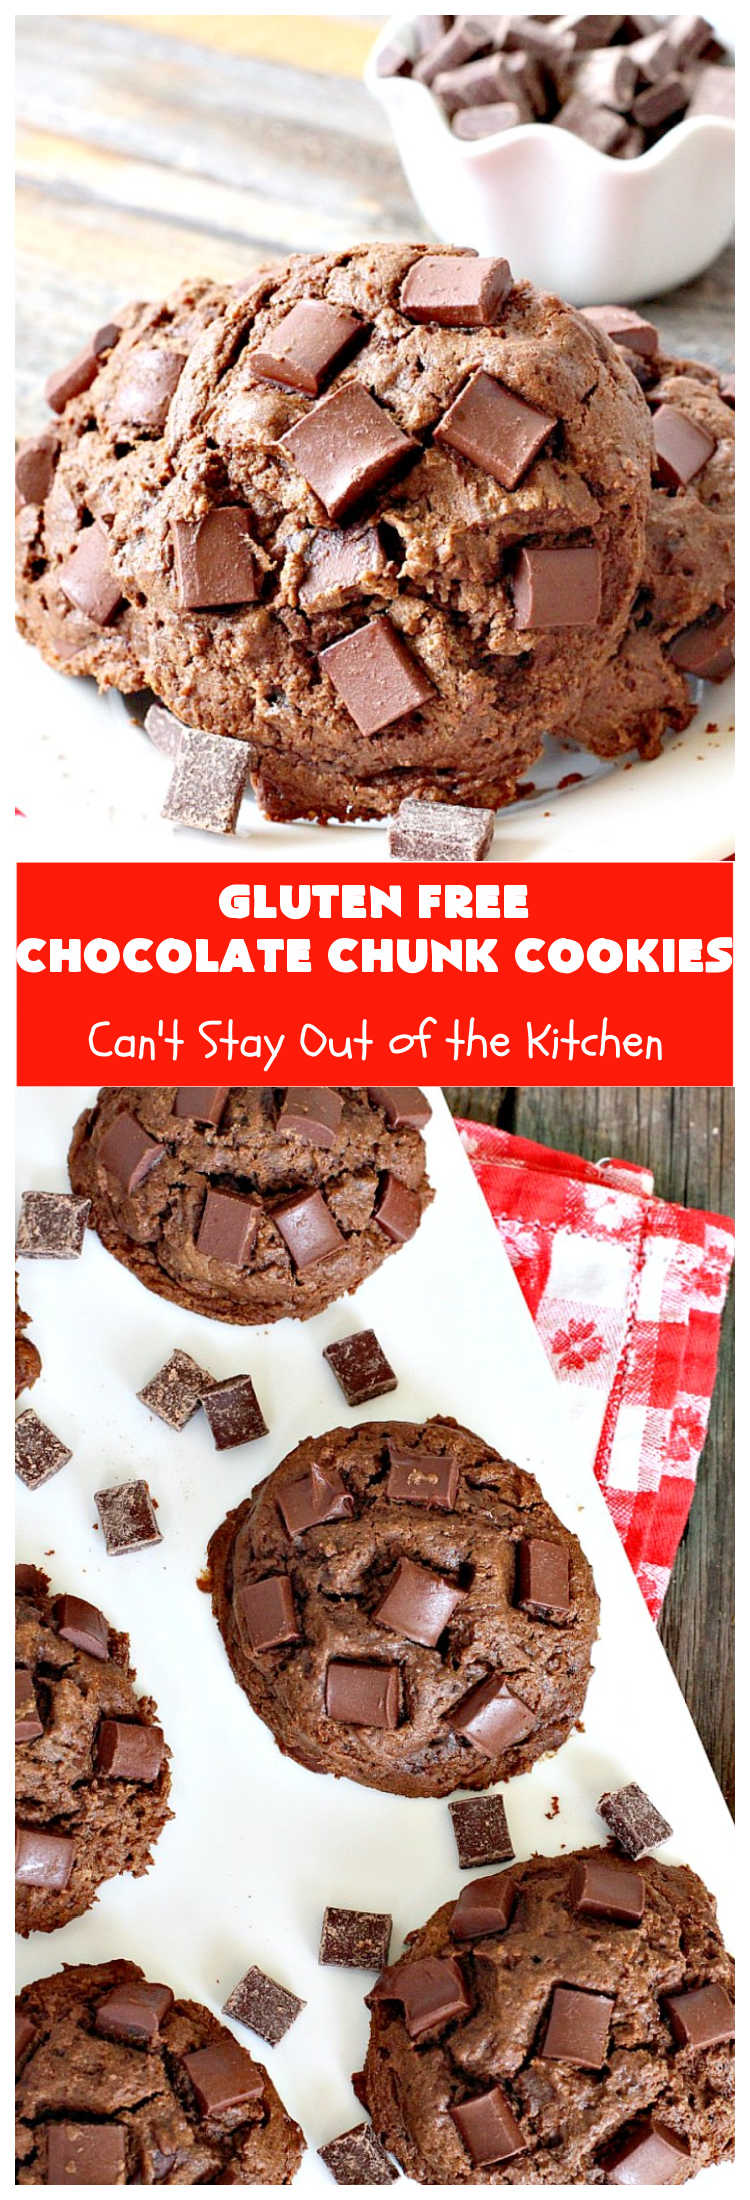 Gluten Free Chocolate Chunk Cookies | Can't Stay Out of the Kitchen | these awesome #cookies are the perfect #dessert for #MemorialDay, #FourthOfJuly, #LaborDay, backyard barbecues or other summer fun. So delicious you won't believe you're eating #GlutenFree #chocolate #tailgating #ChocolateDessert #GlutenFreeDessert #GlutenFreeChocolateChunkCookies